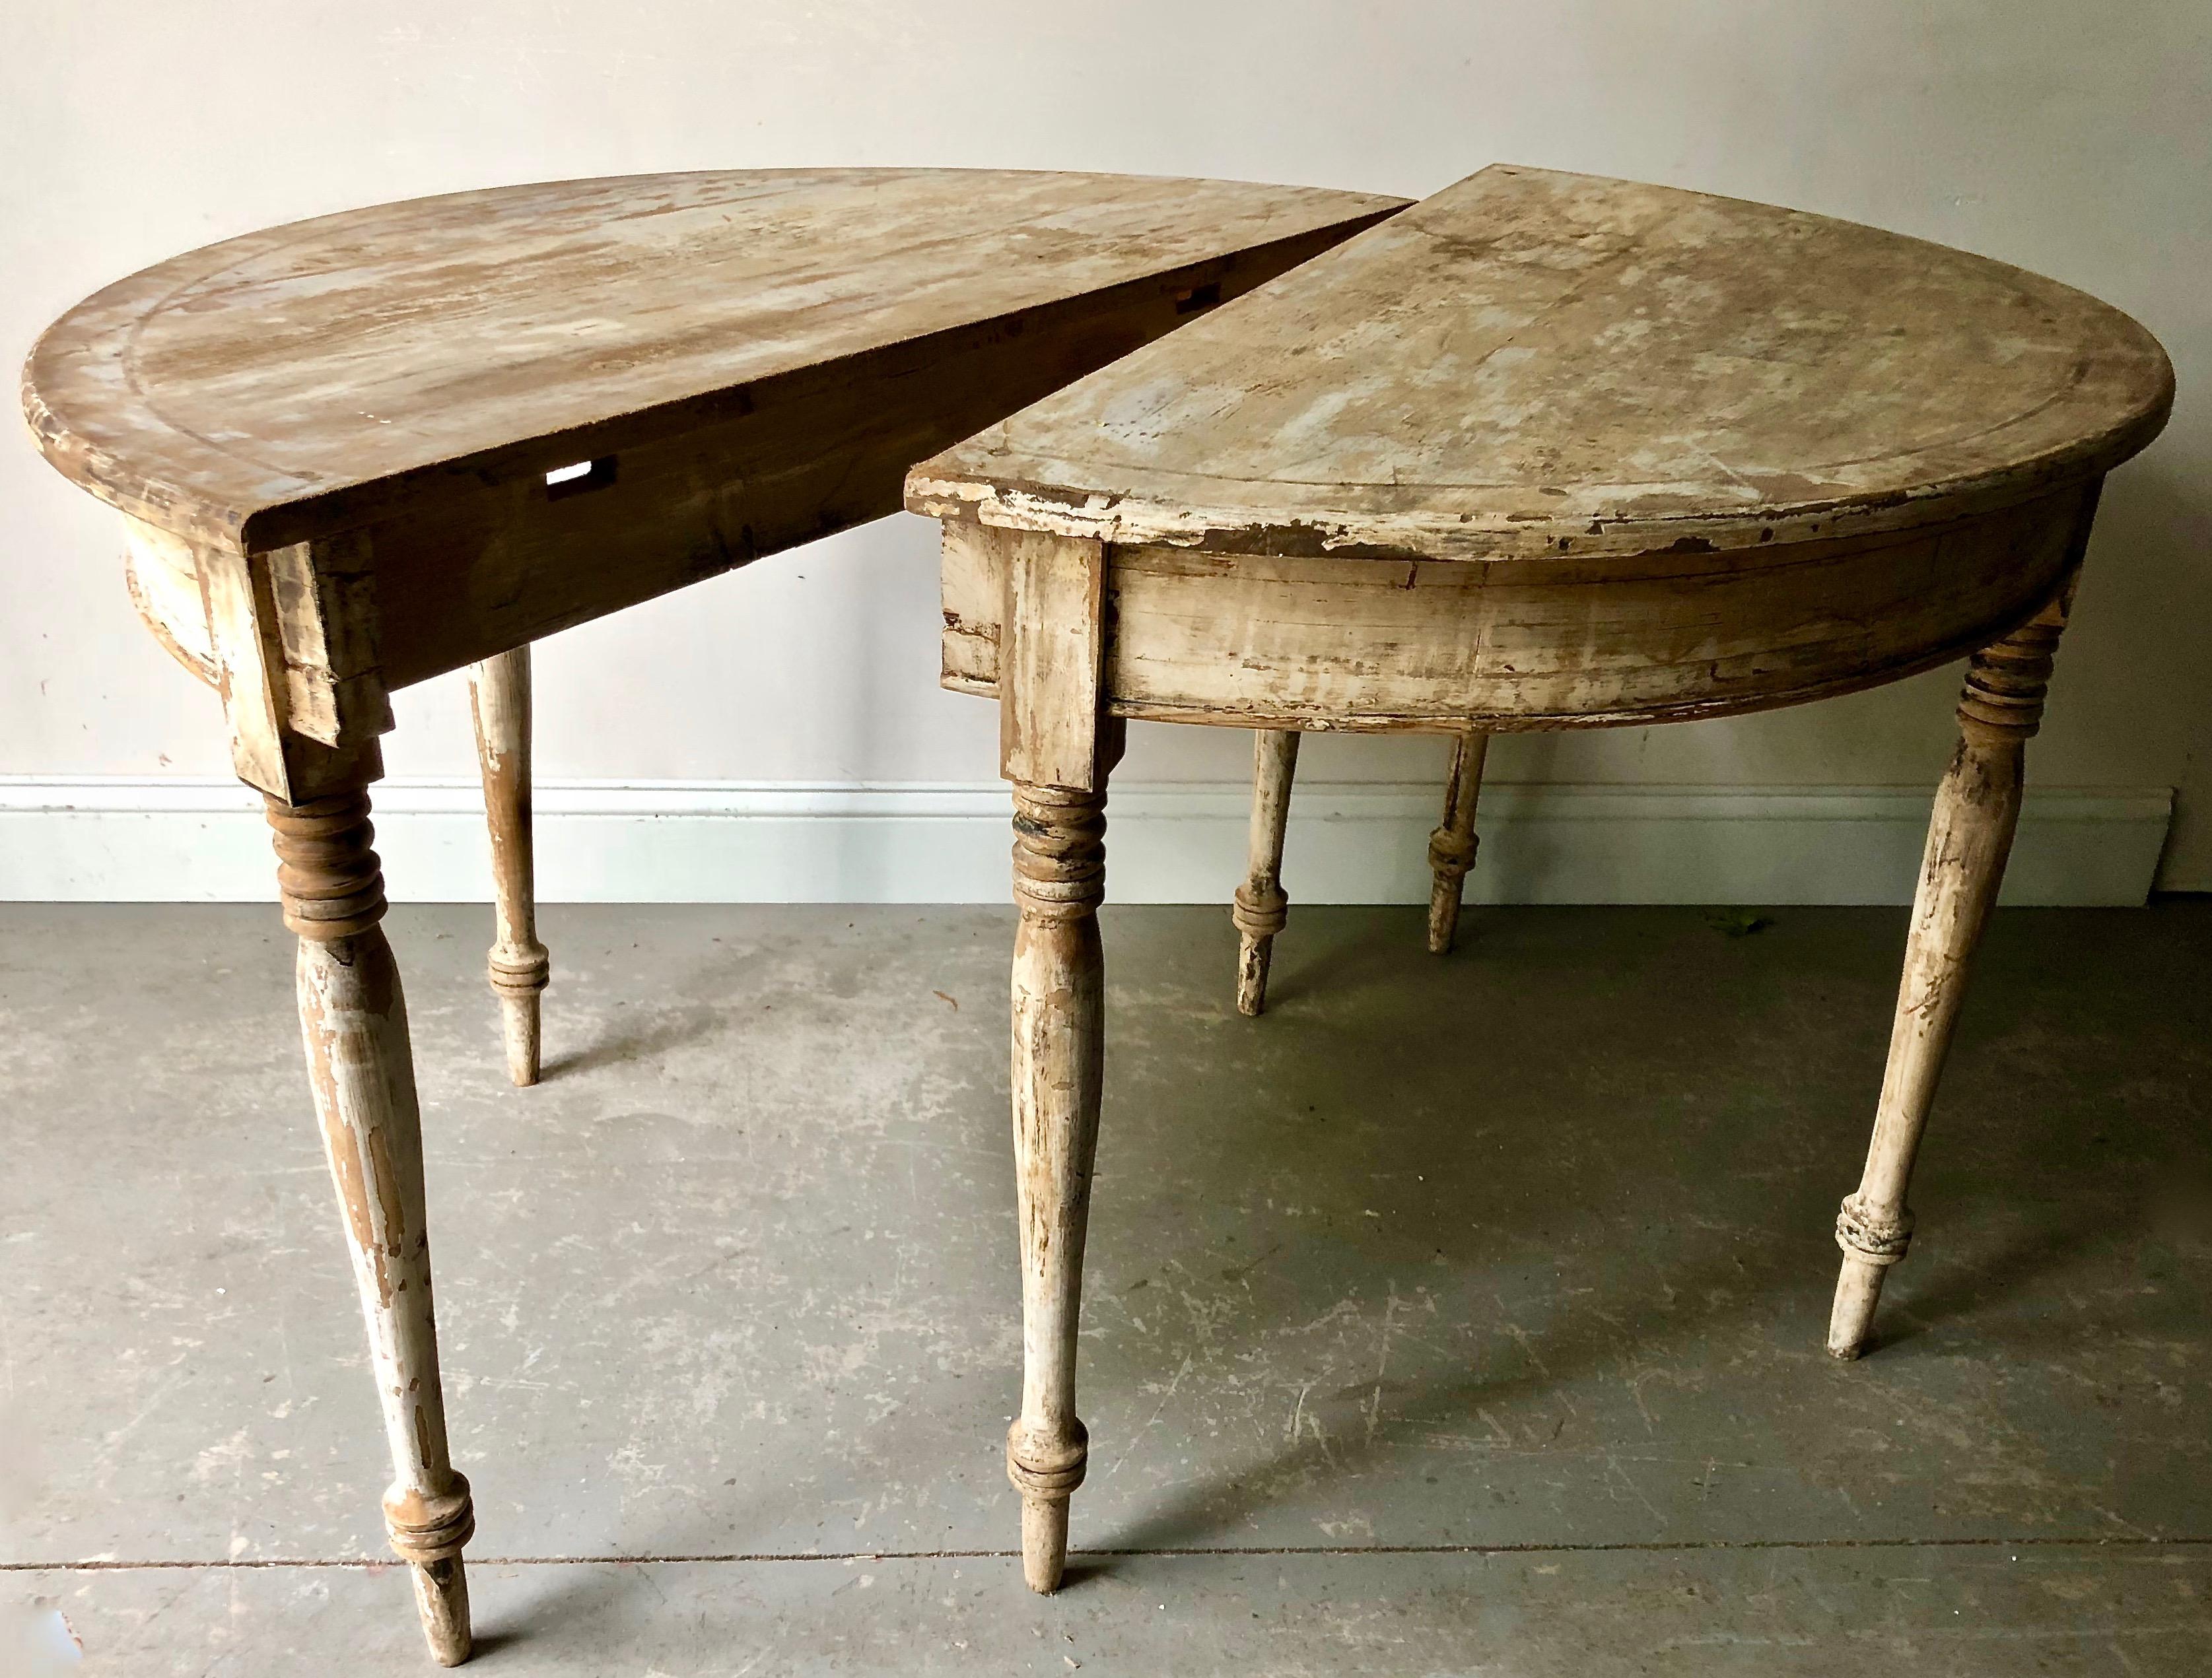 A handsome pair 19th century Swedish demilune tables with turned, tapered legs scraped back to traces of it's original color. 
Sweden, circa 1850.
Diameter when together 43.50